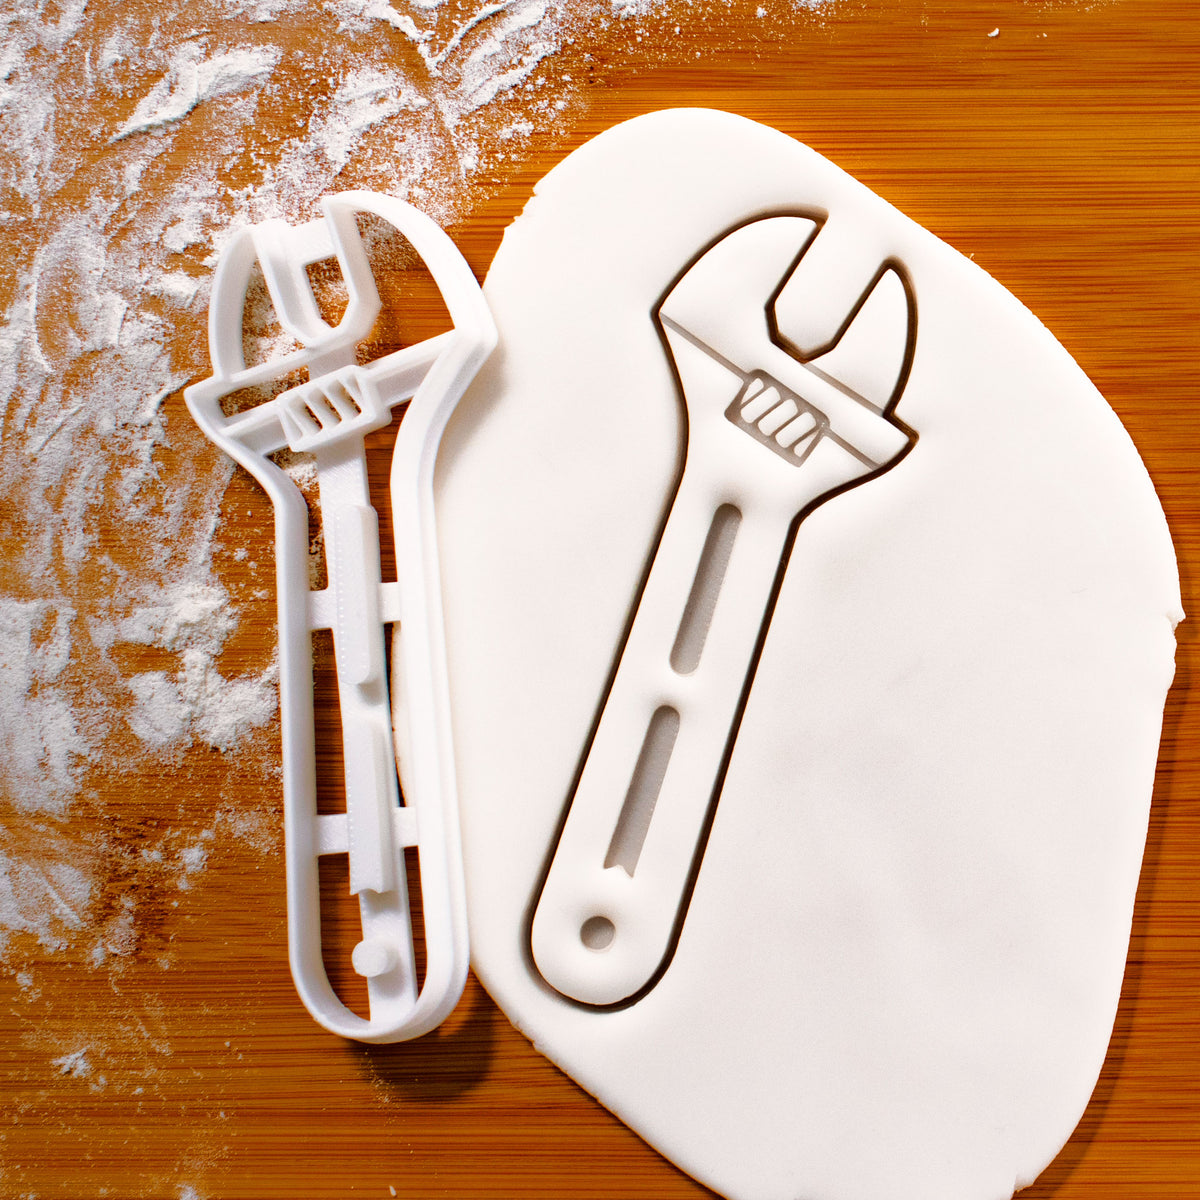 wrench cookie cutter pressed on fondant